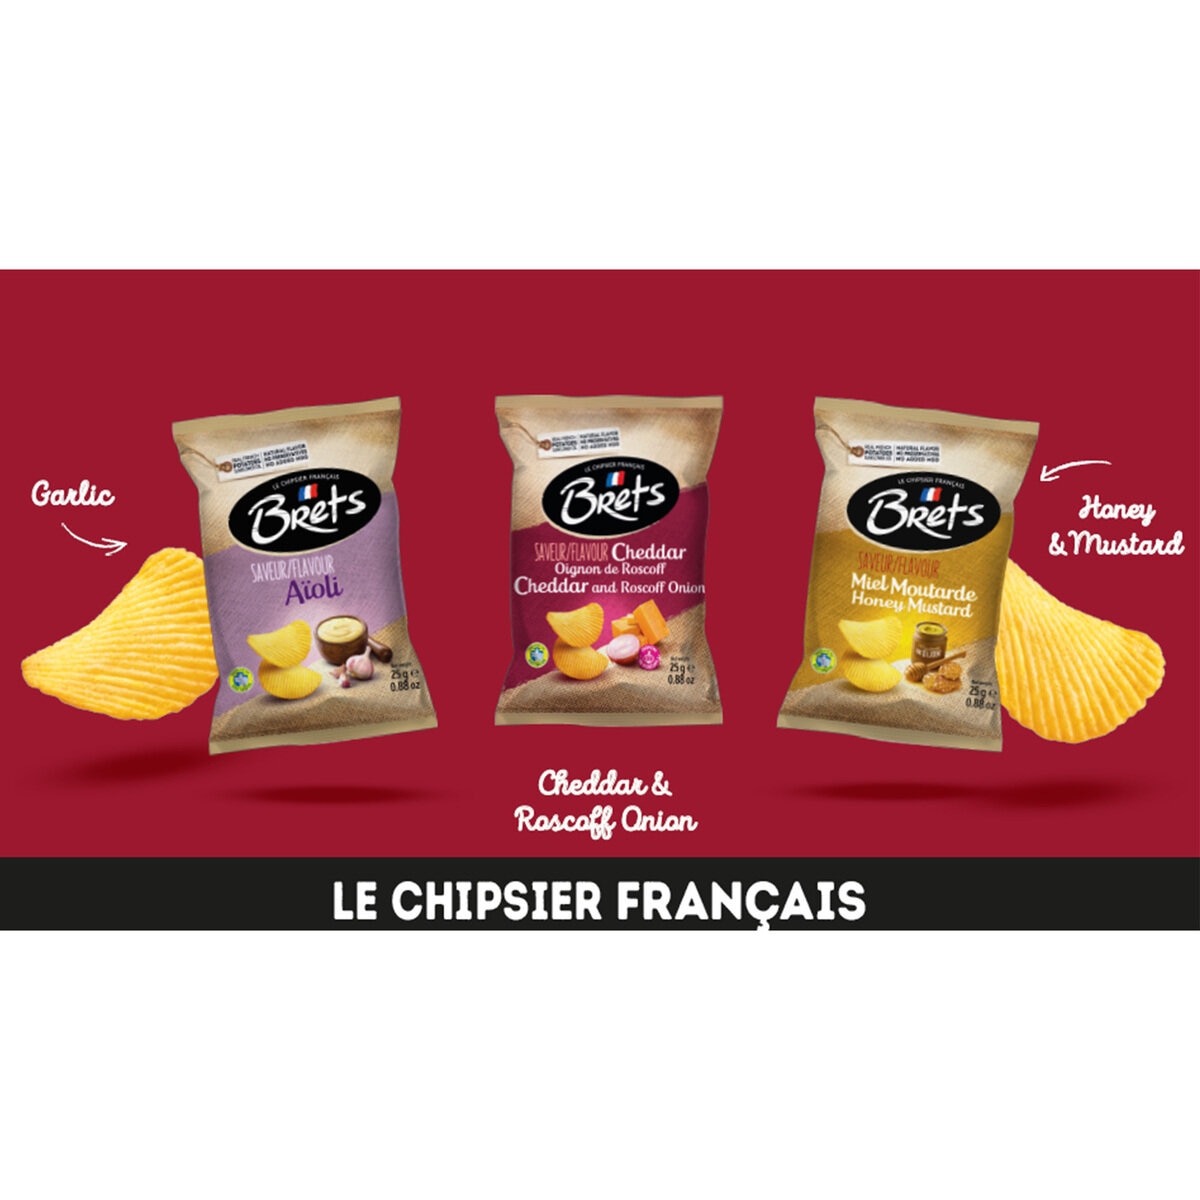 Brets Potato Chips from Brittany — Fromage Frais & Fines Herbes Flavor 125g